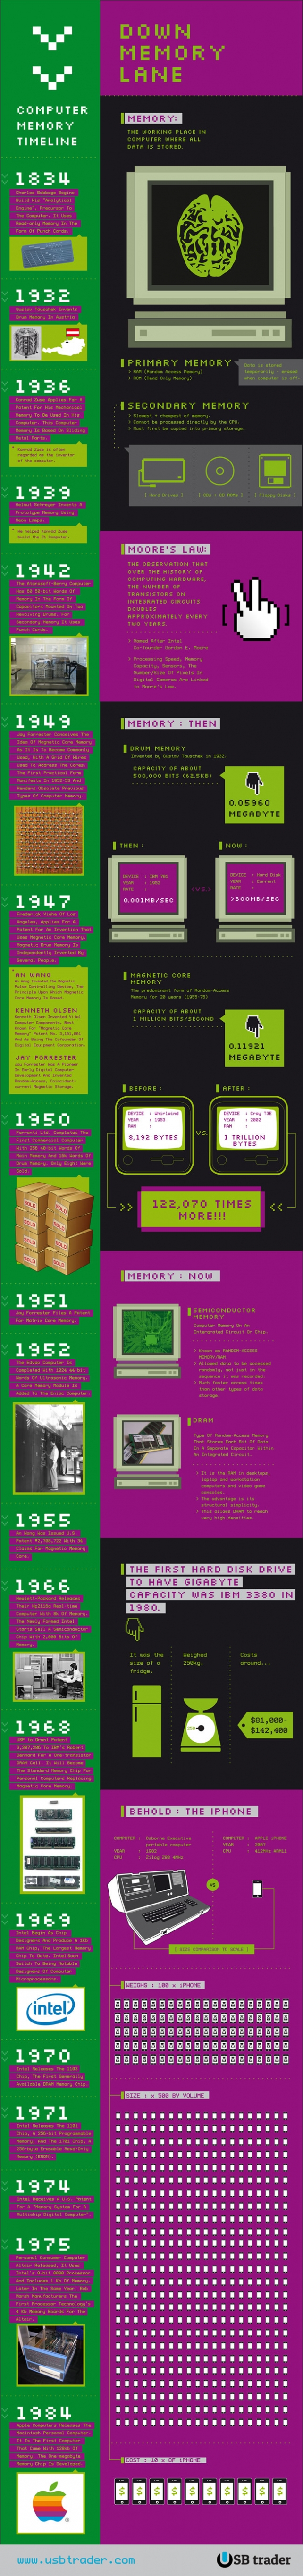 The history of computer memory - Infographic